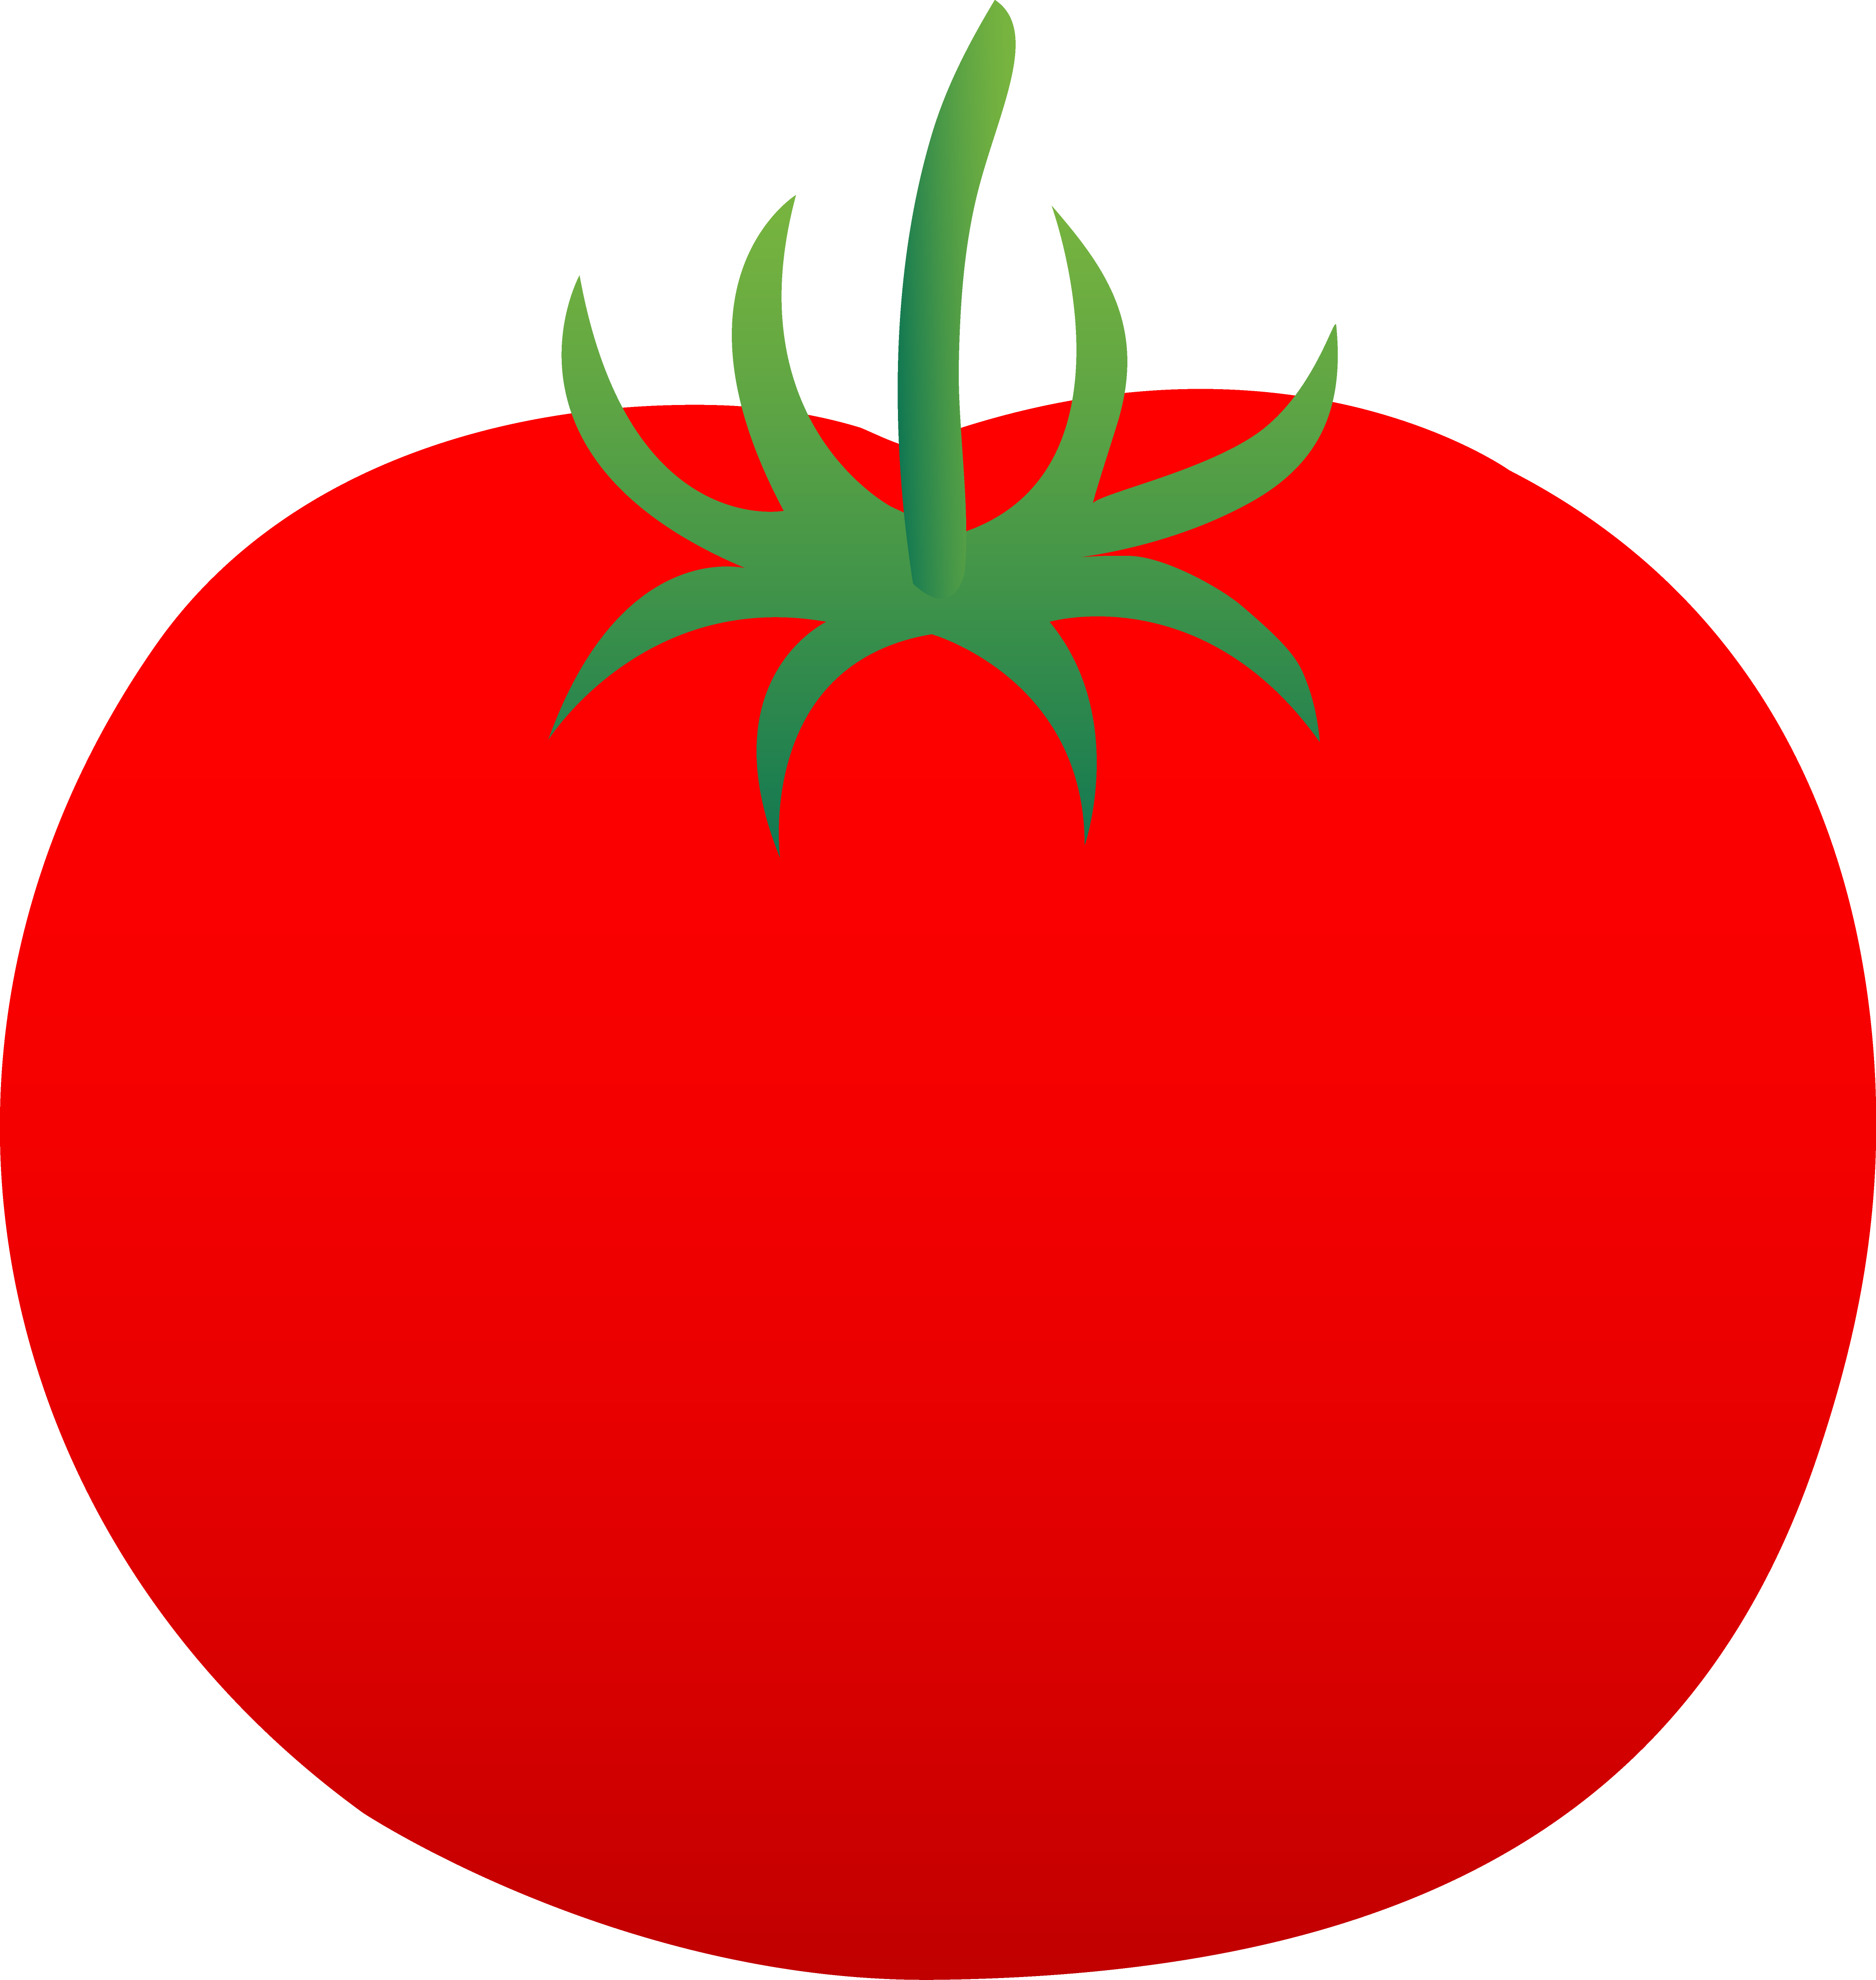 free clipart of vegetables and fruits - photo #46